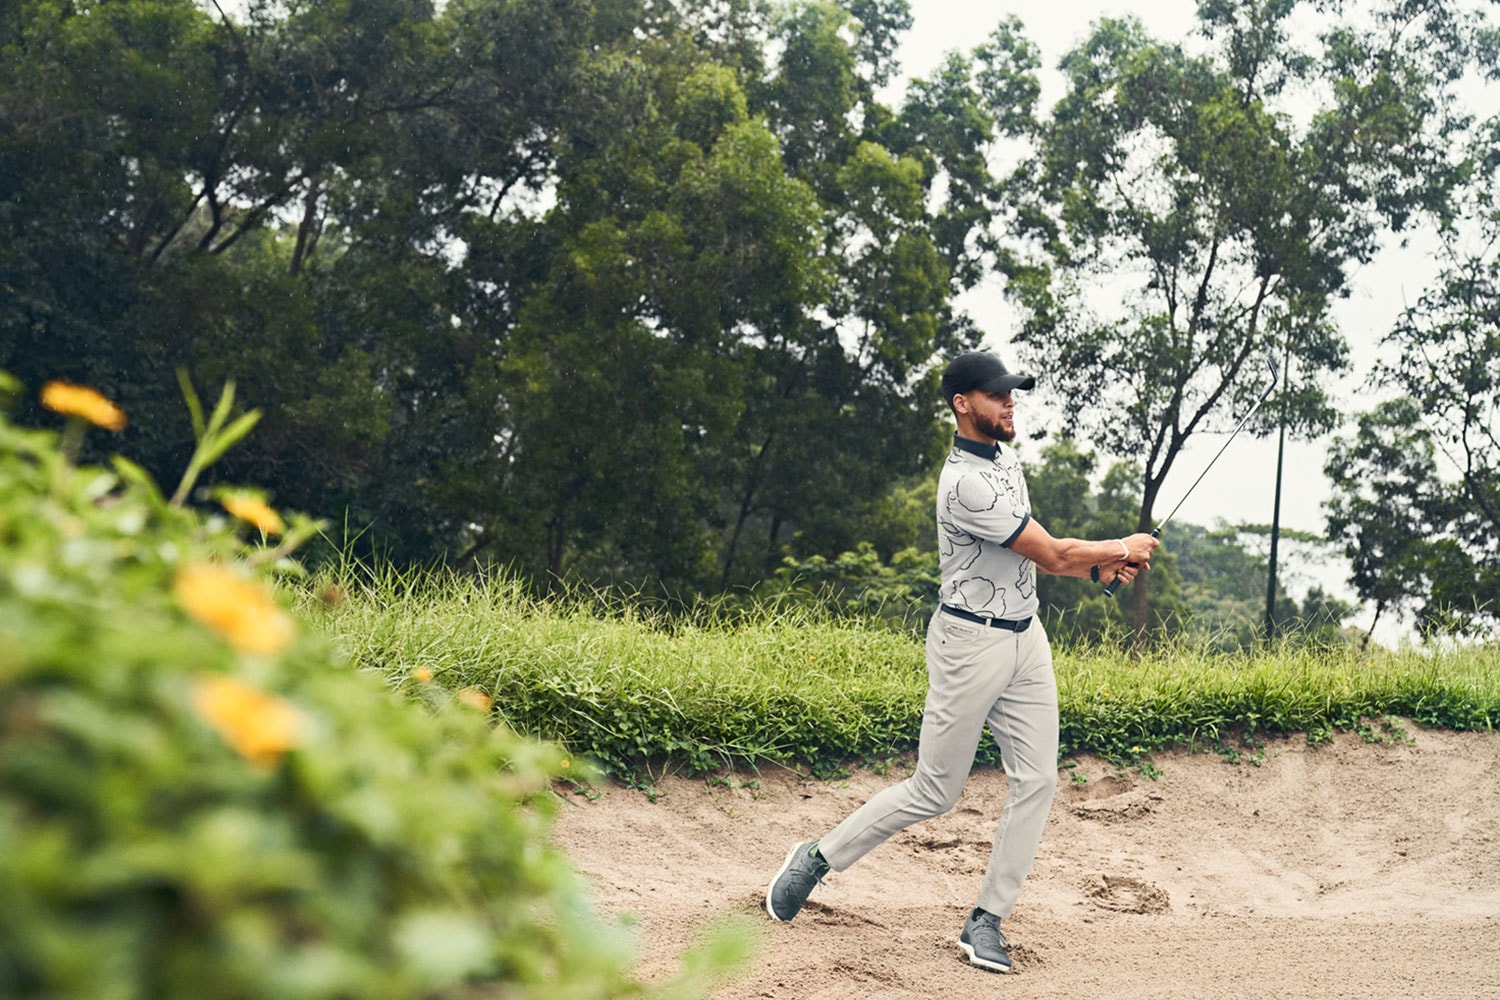 Stephen Curry Pre-Release Under Armour Golf Collection 2020 UA Vanish UA Storm Apollo Bomber jacket 5-pocket Chino pants Curry 6 spikeless golf shoes UA Golf Rotational Resistance TPU outsole American Century Celebrity Golf Championship